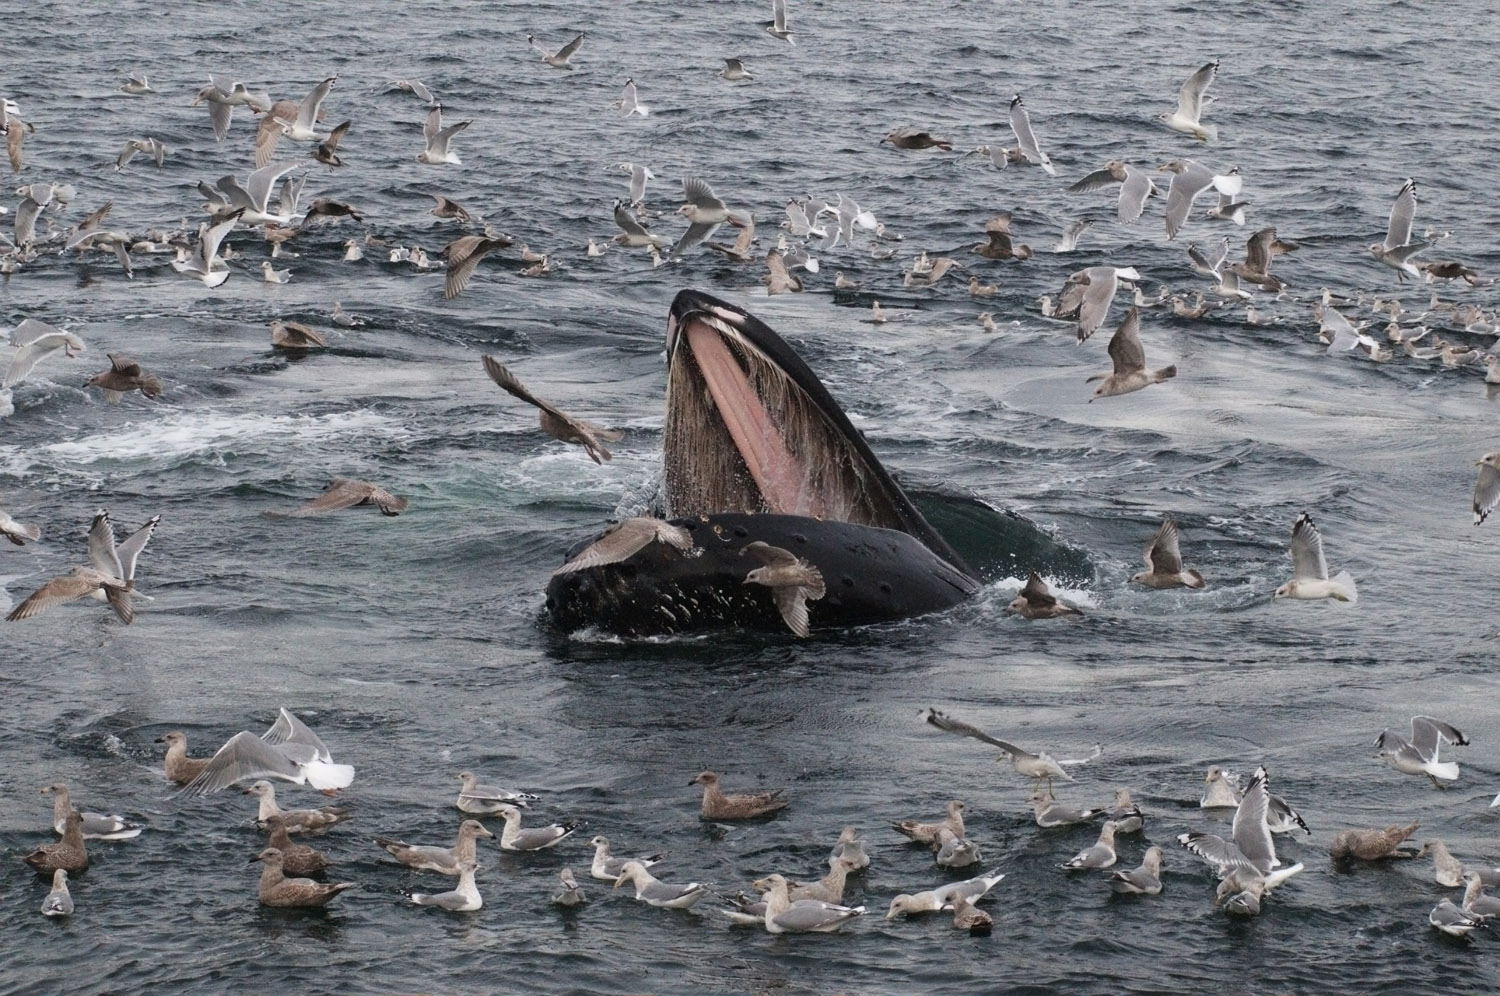 whale-surrounded-by-birds.jpg